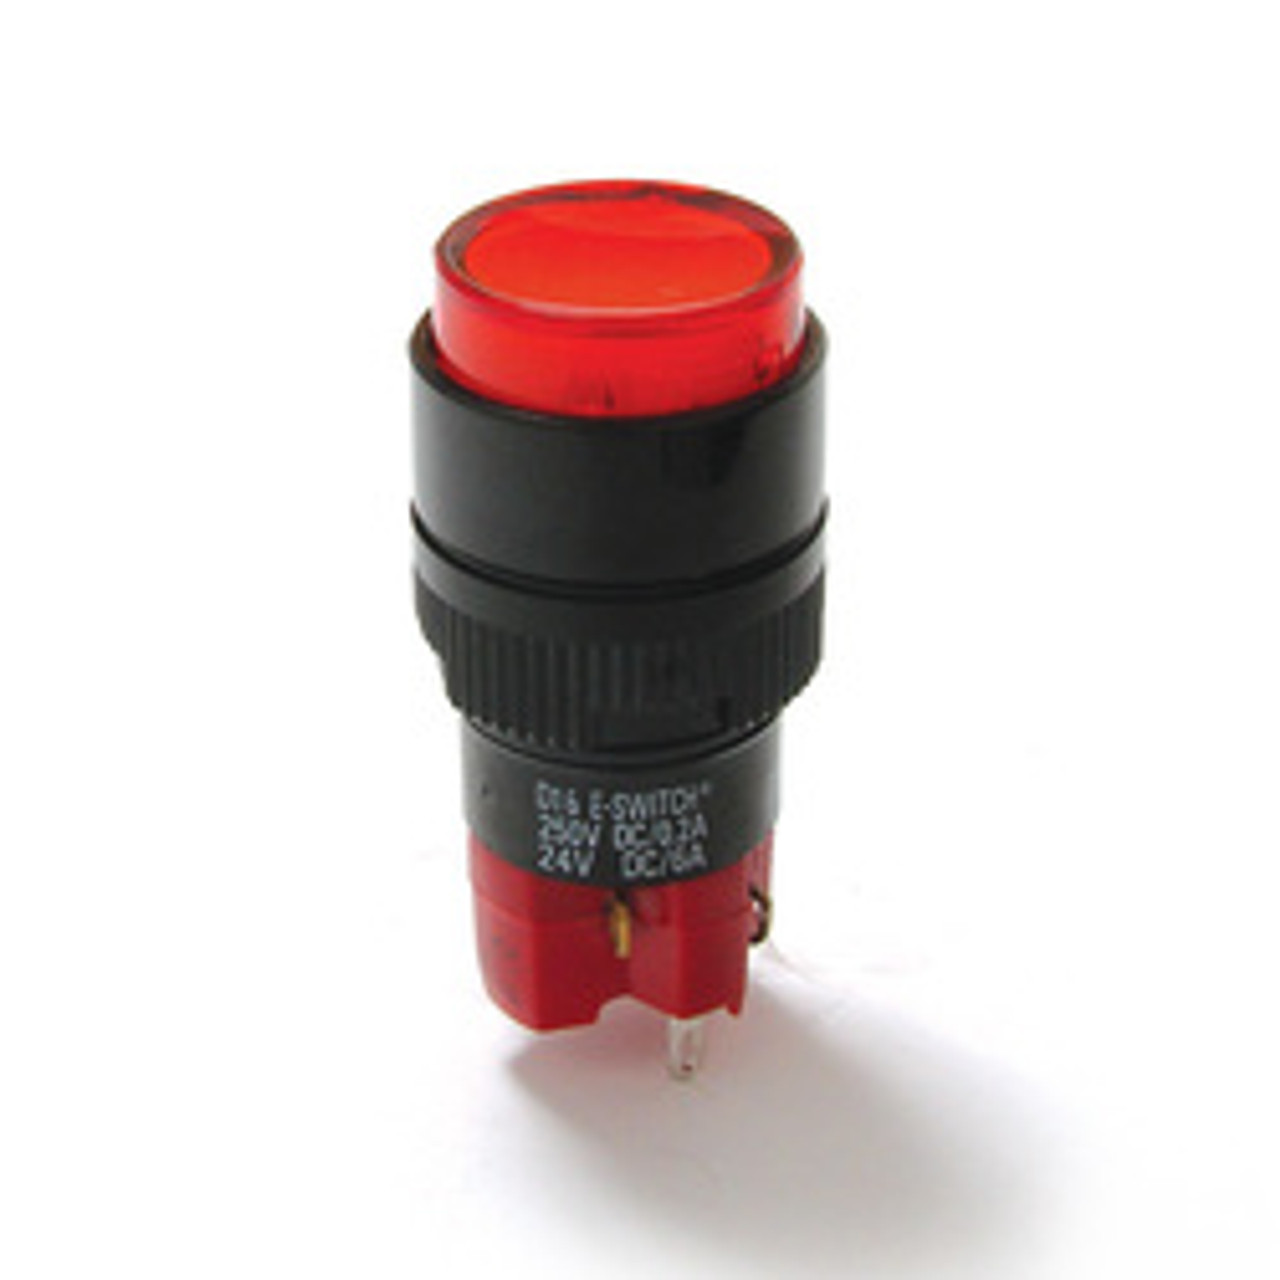 E-Switch D16OAT13 Pushbutton Switches